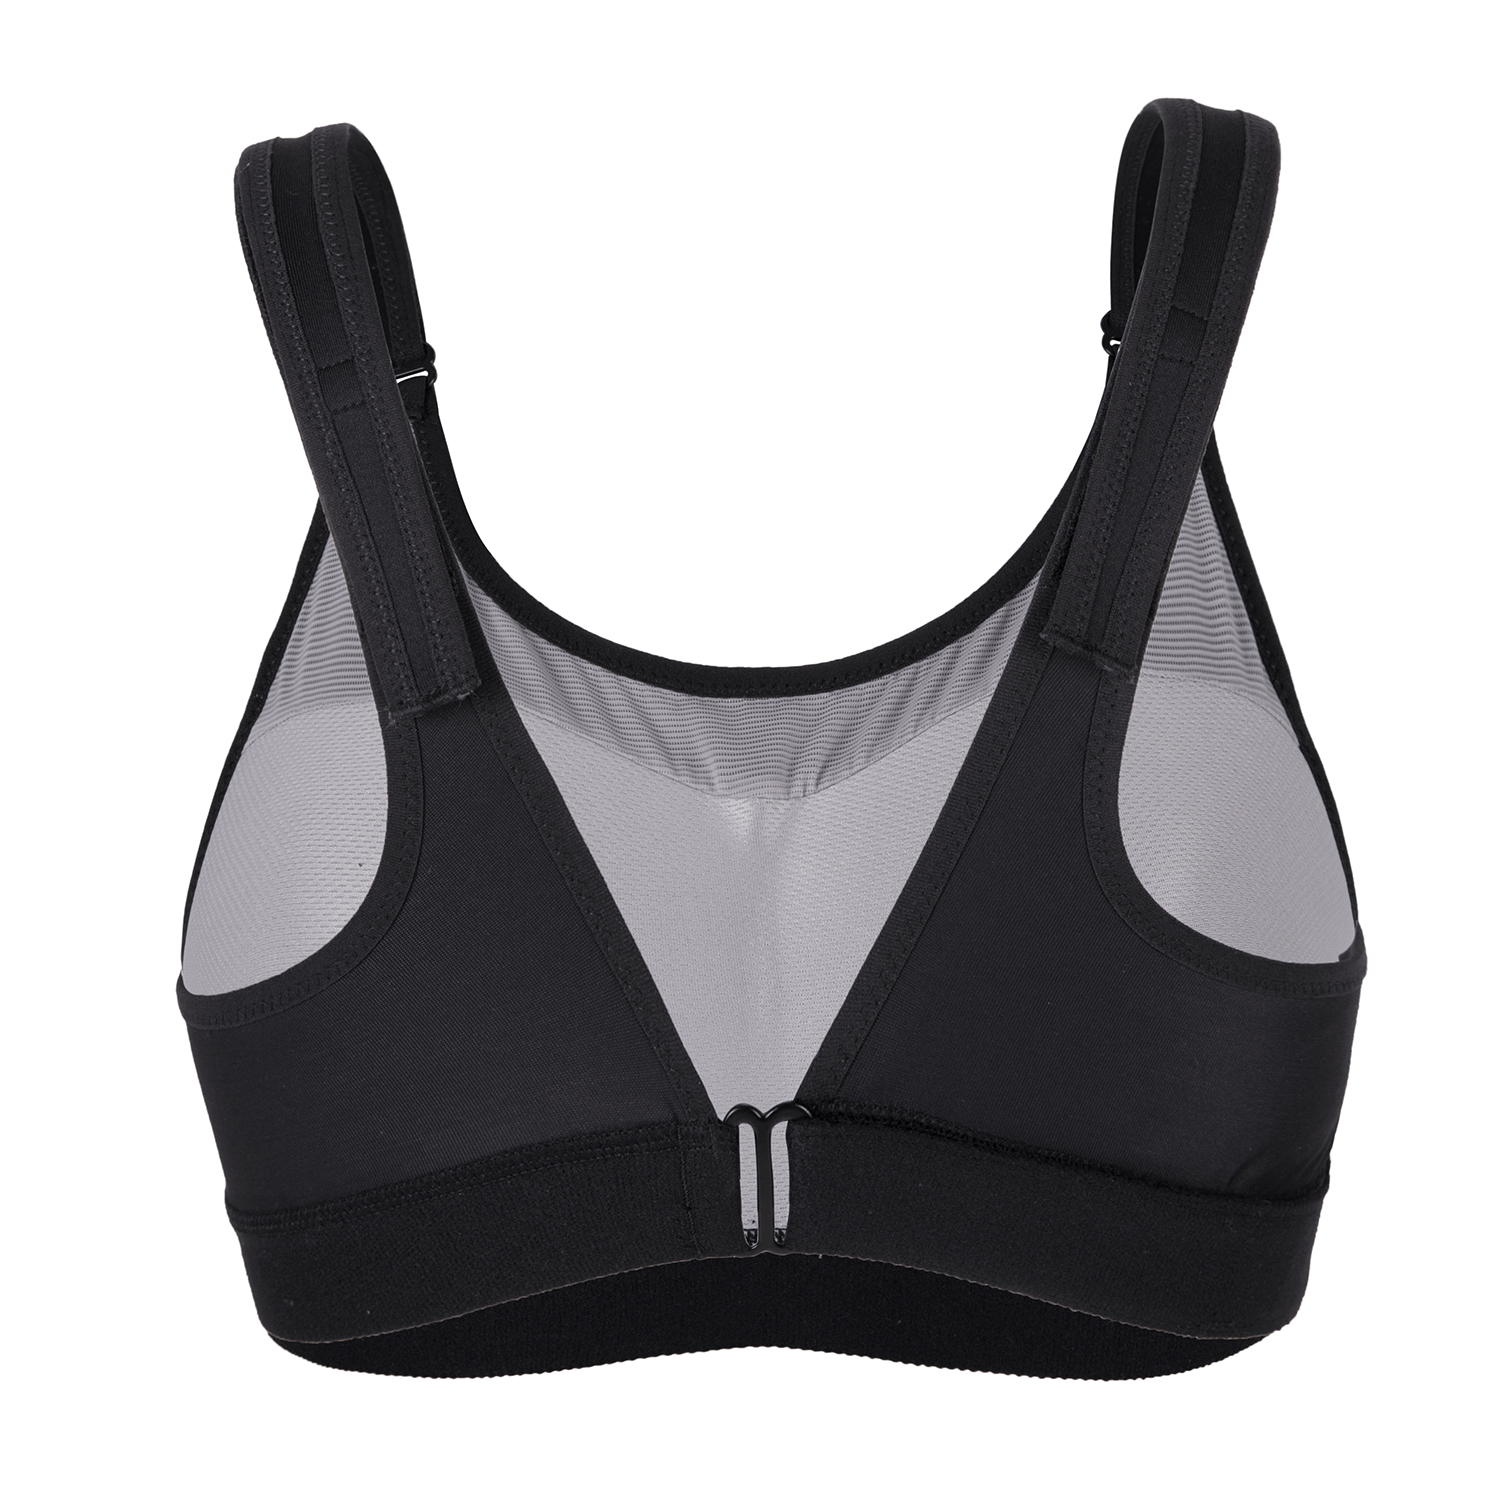 SYROKAN Sports Bra Front Adjustable Wirefree High Impact Full Support ...